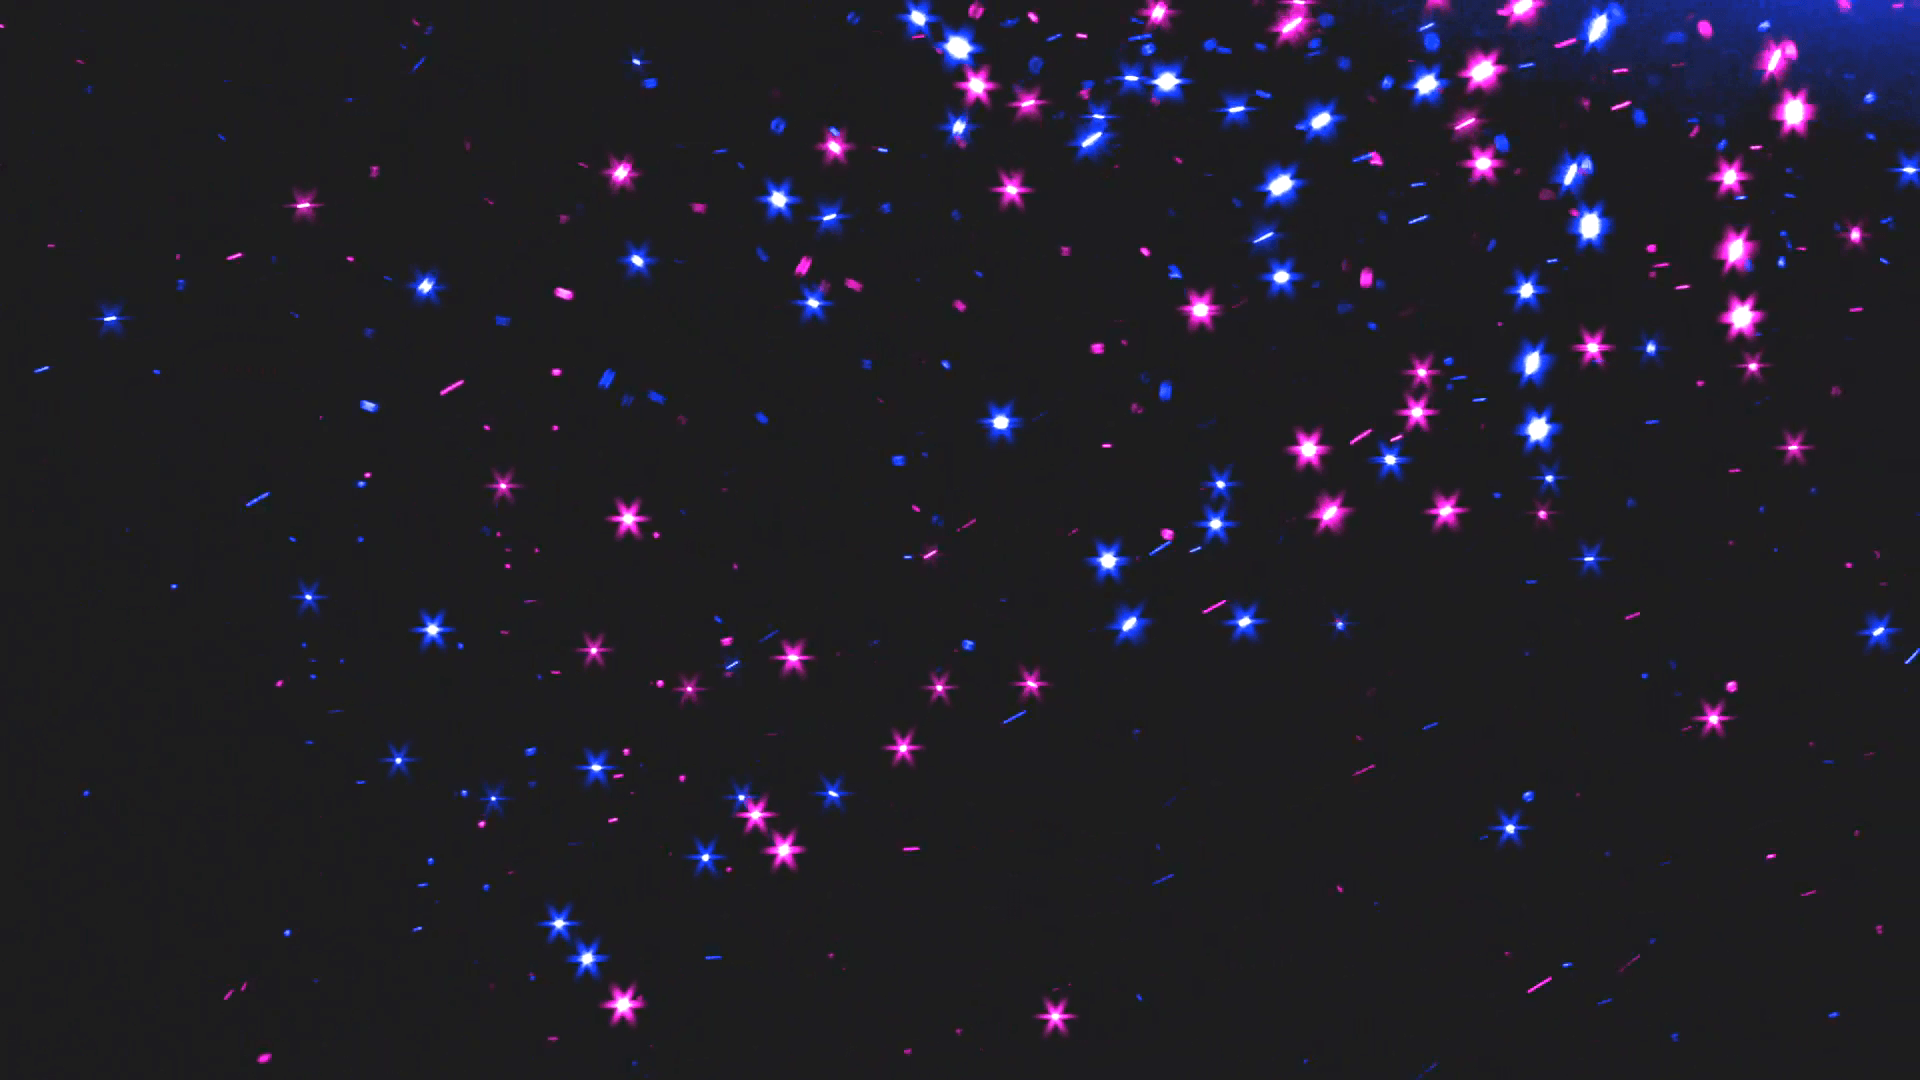 Black Sparkly Backgrounds That Move